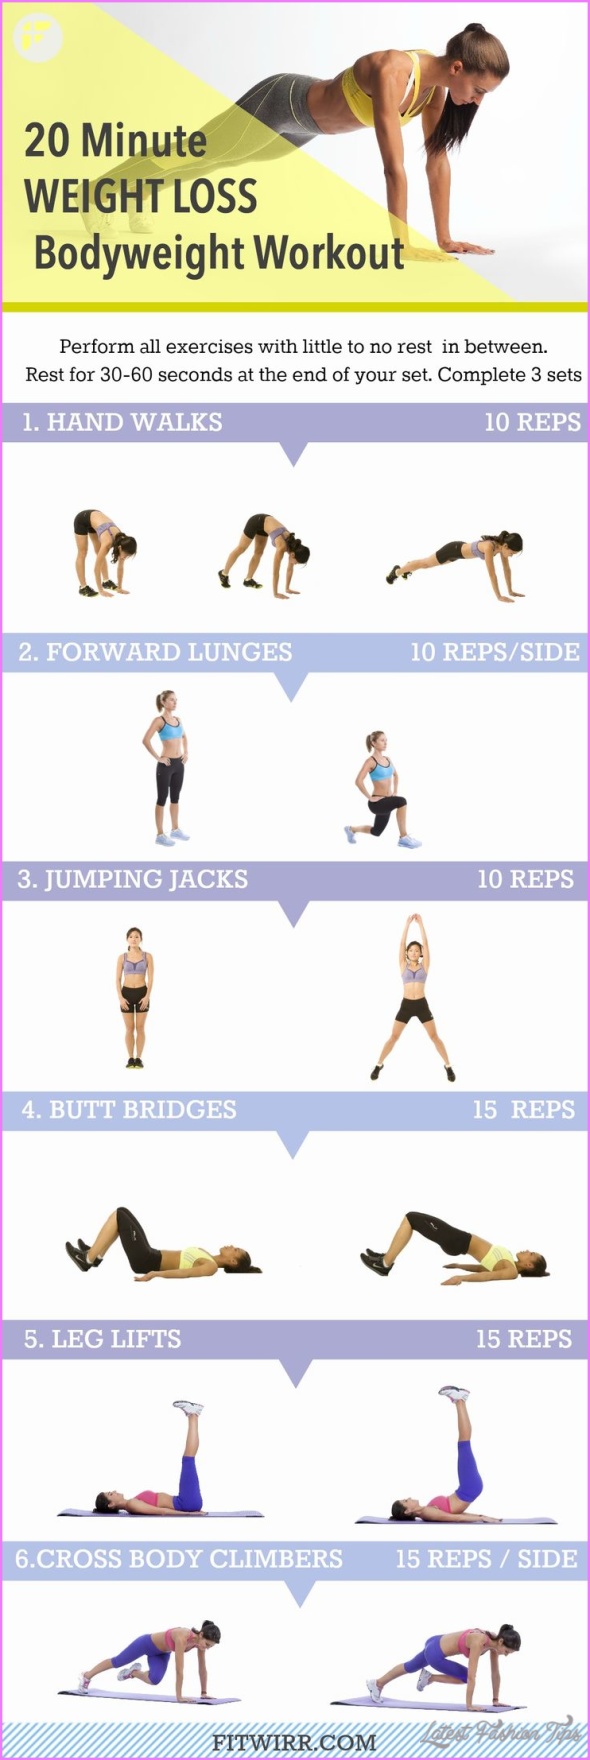 6 Day Home Exercises For Weight Loss for Weight Loss